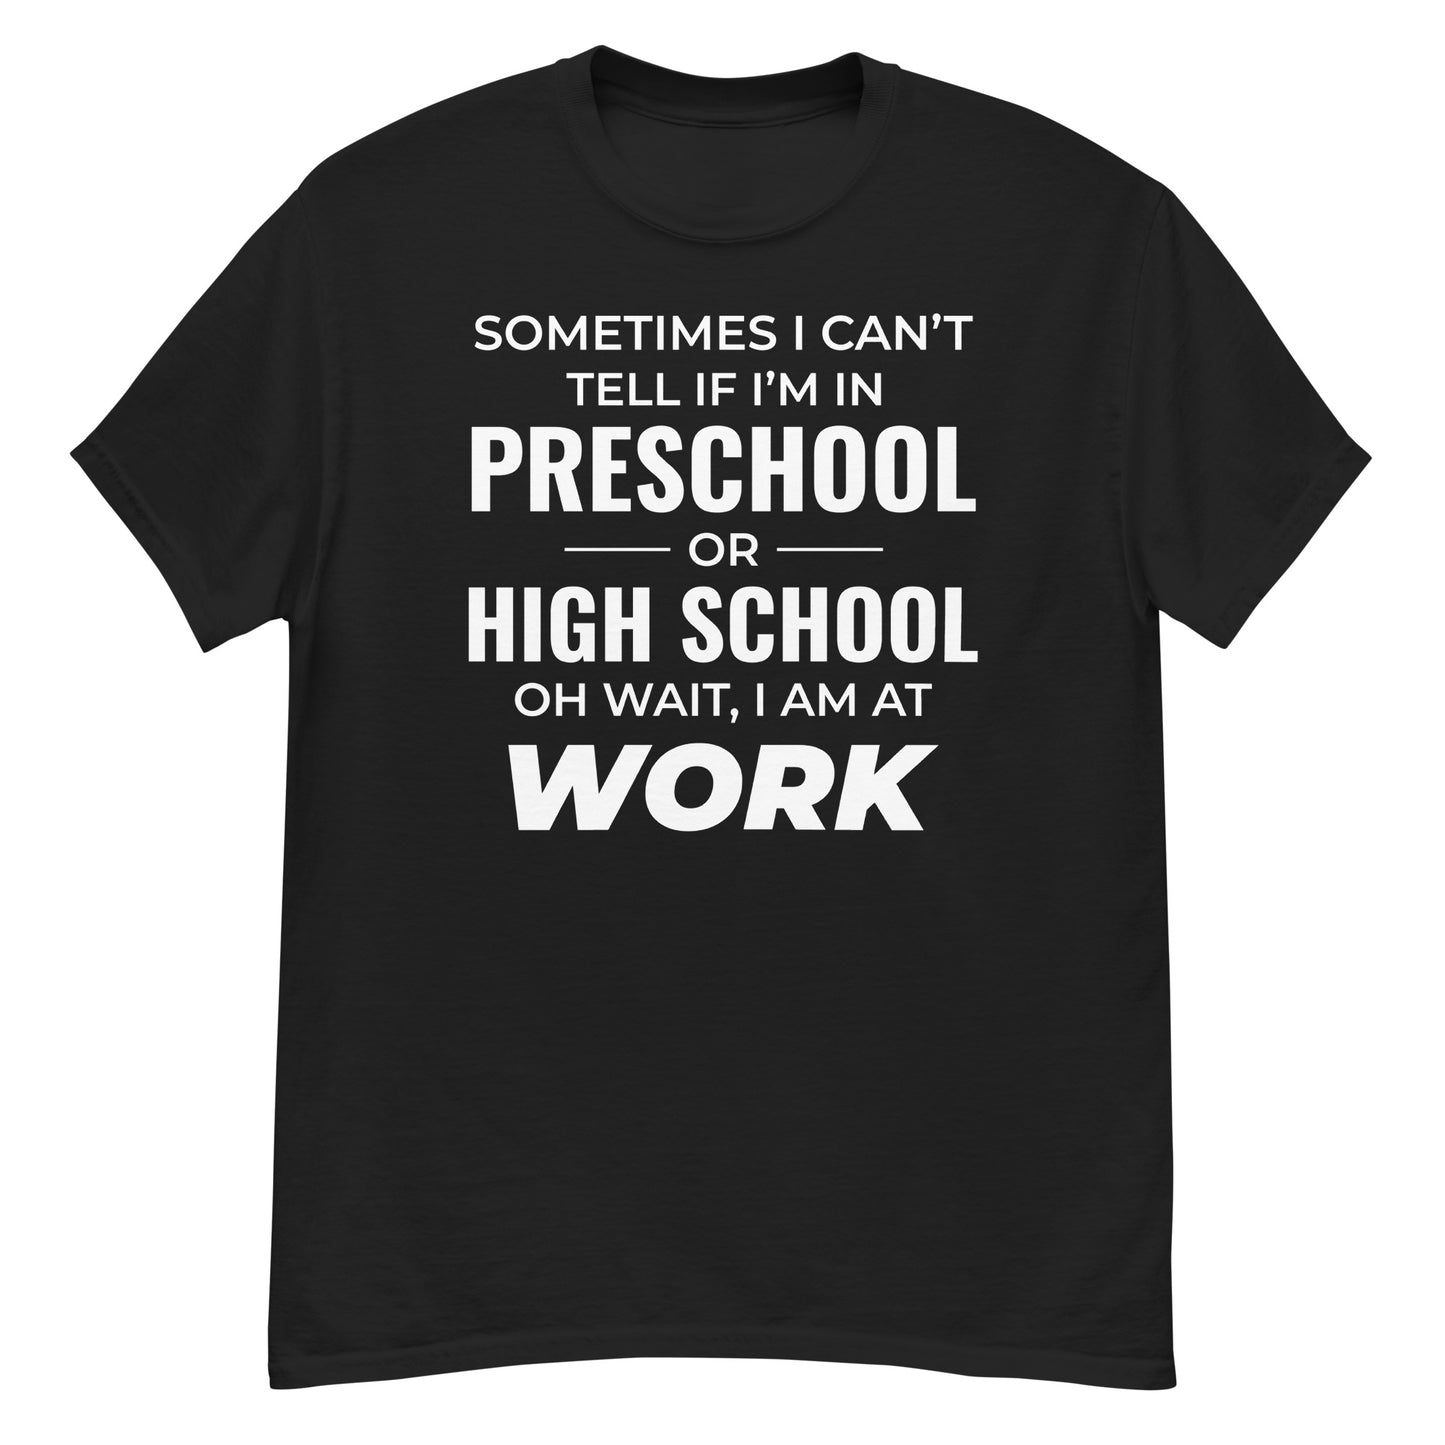 Funny work office shirt